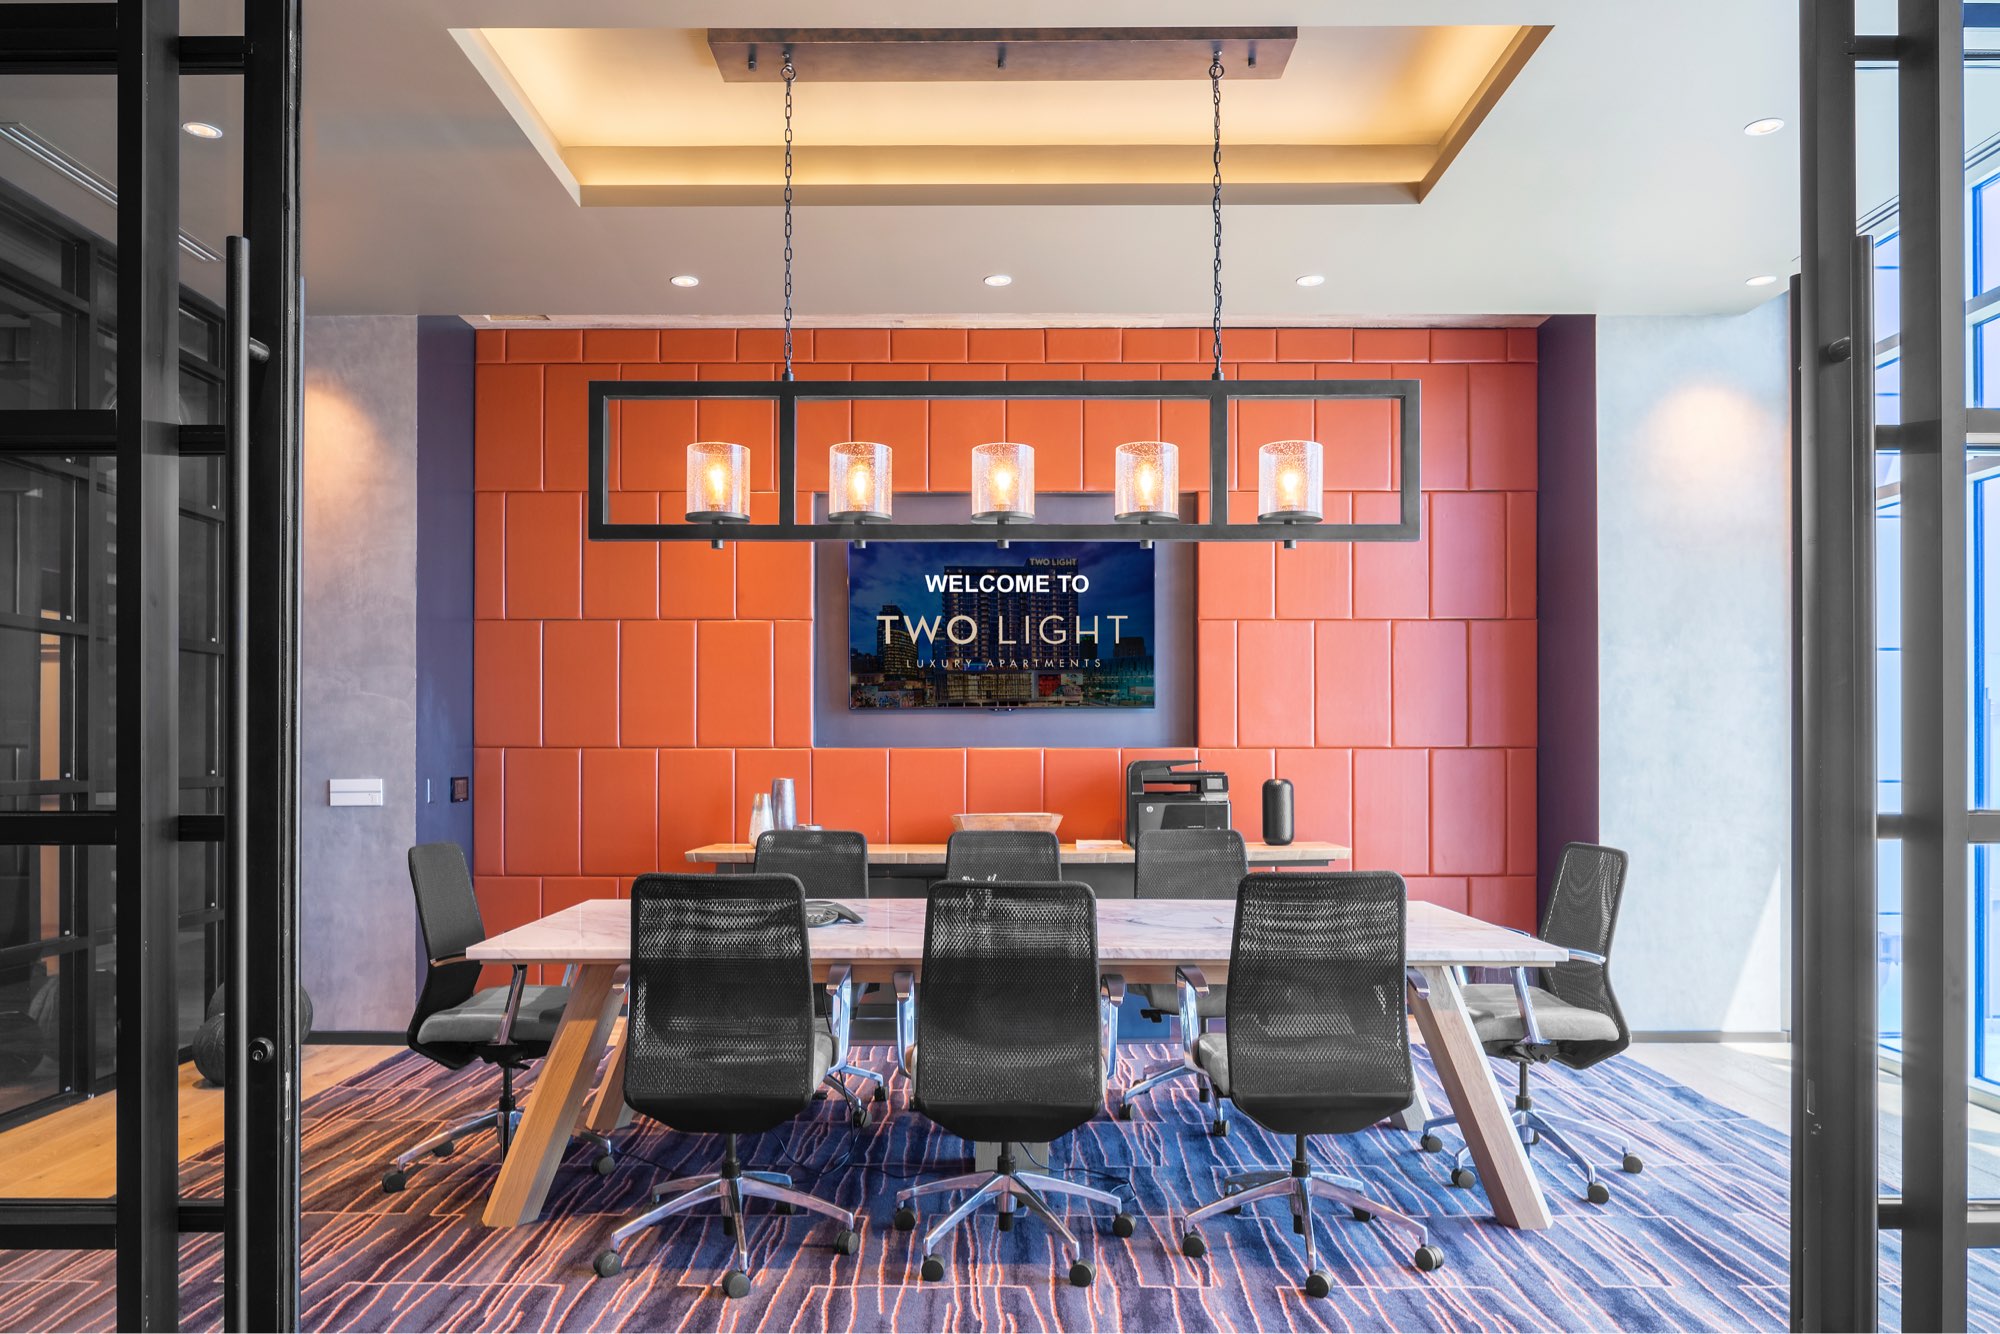 Two Light Luxury Apartments offers a Business Center and Conference Room